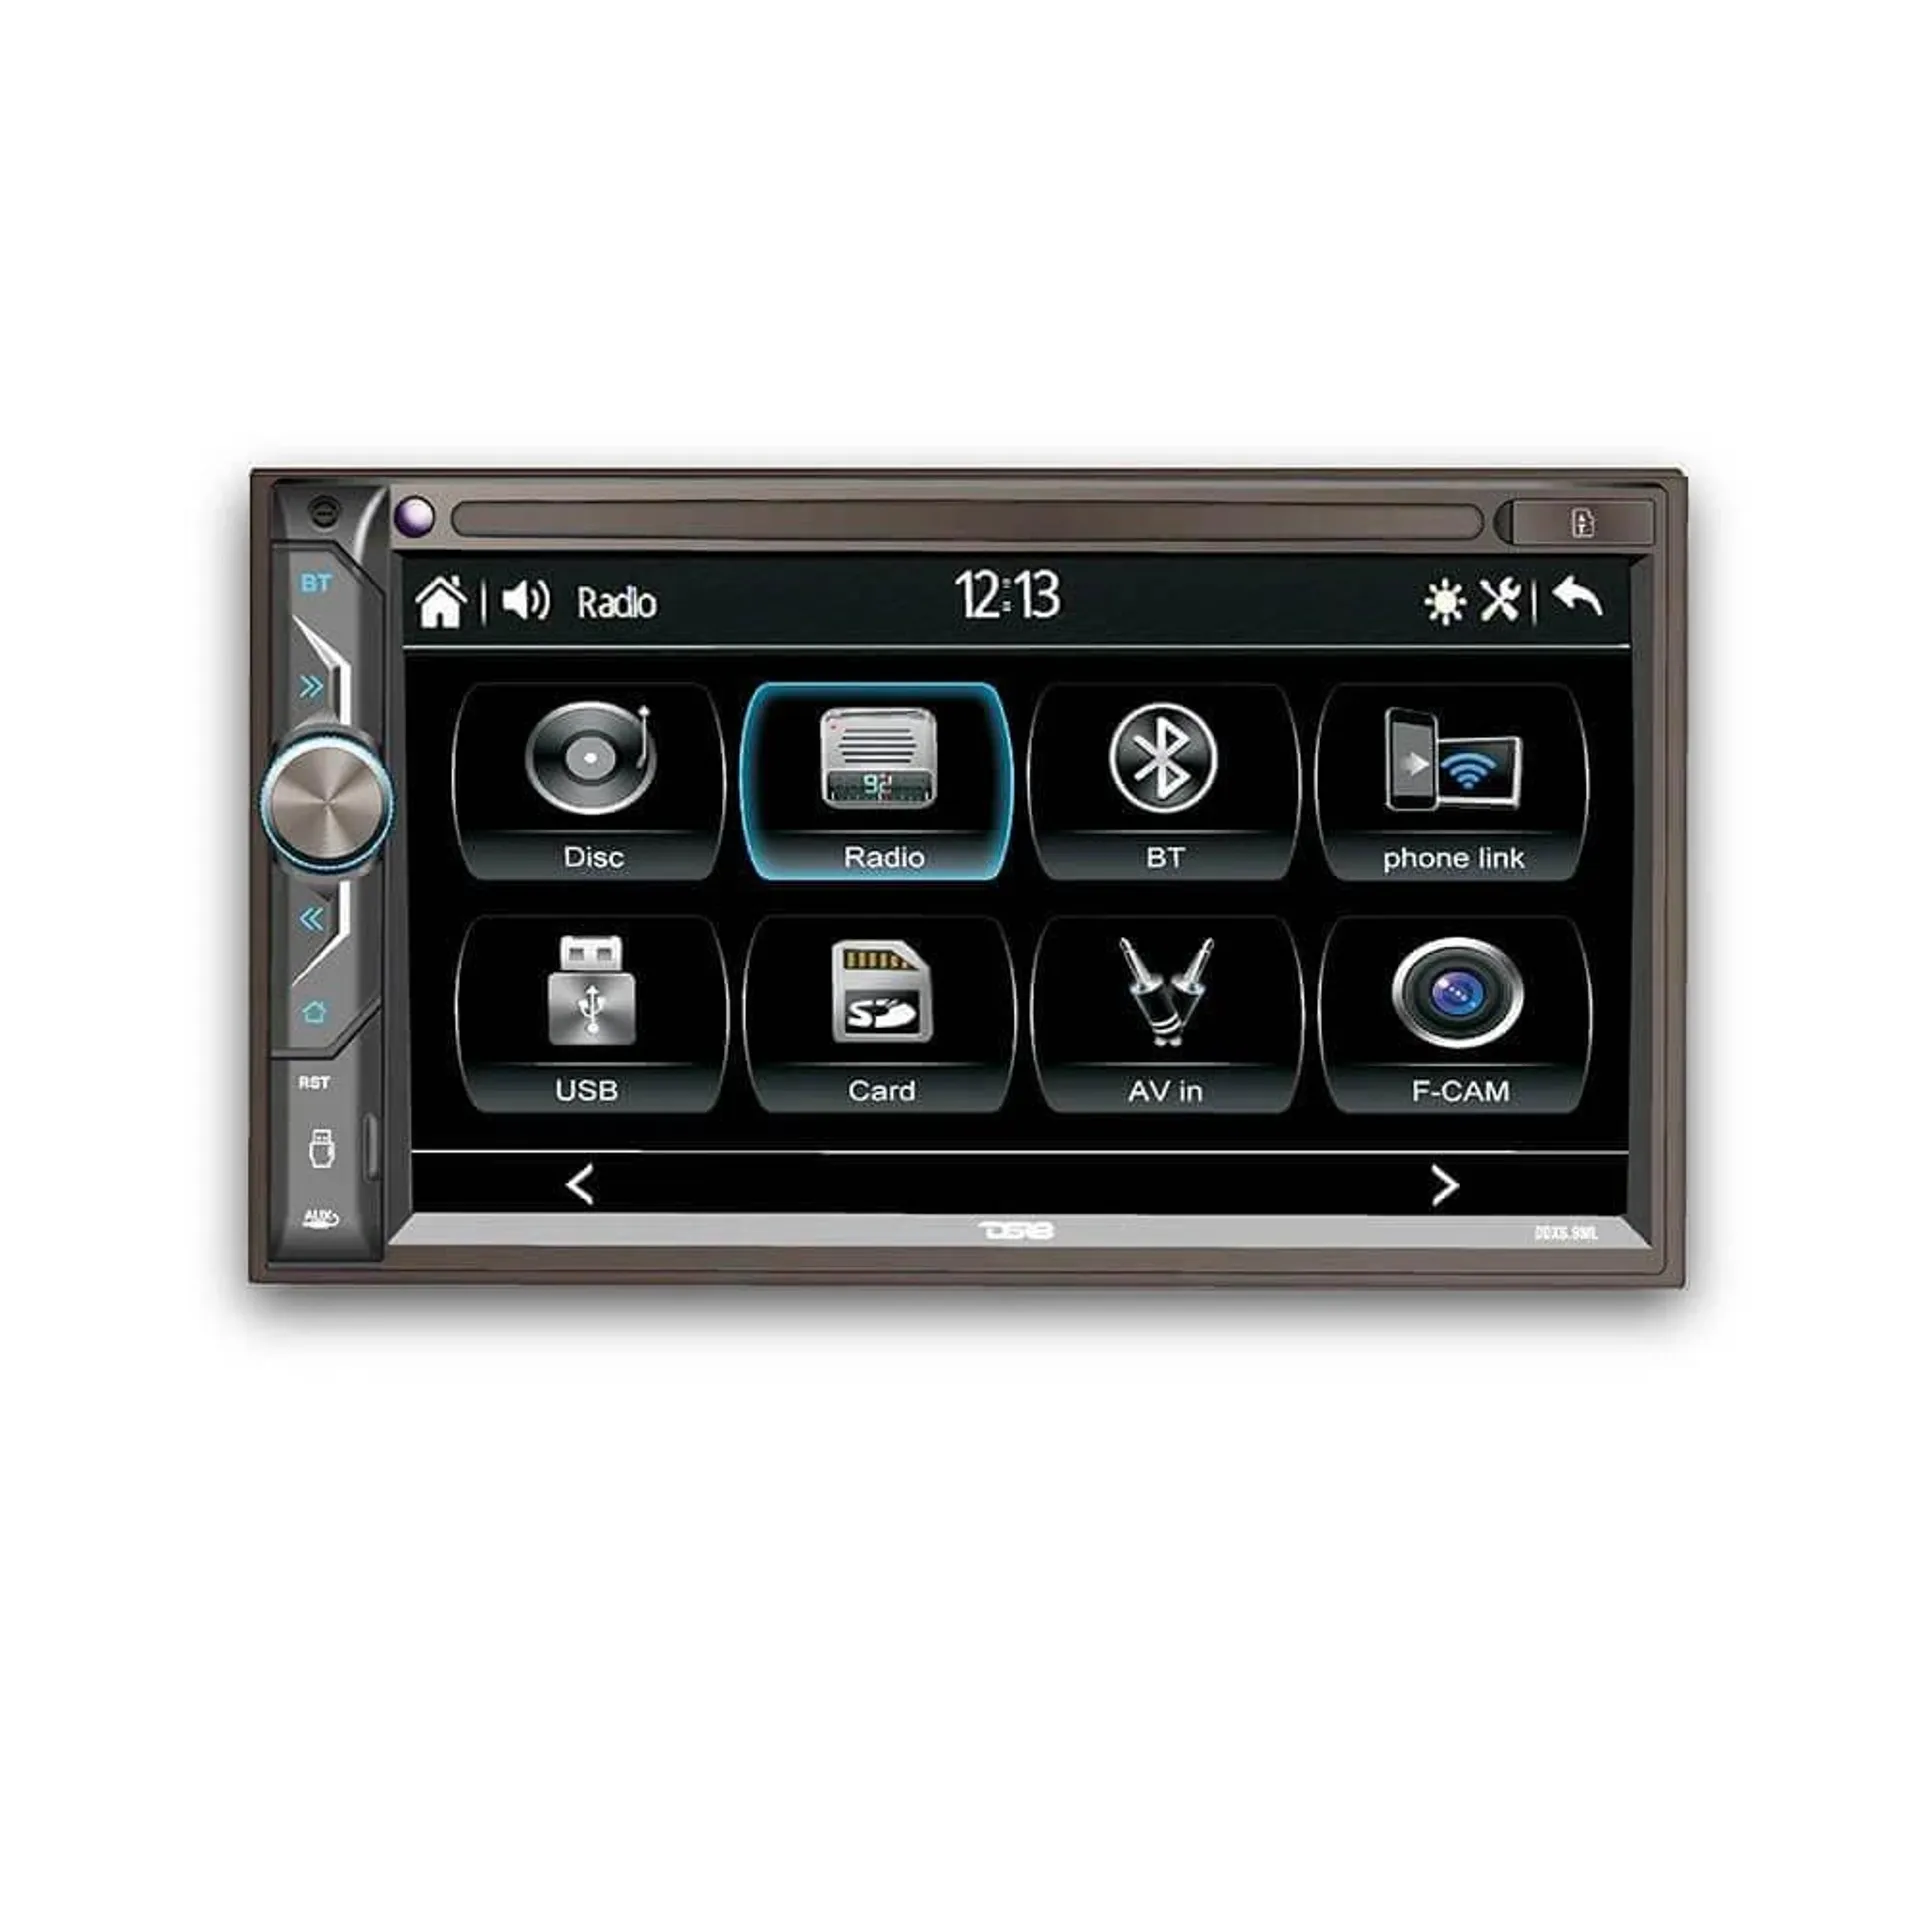 6.9 inch Touchscreen Double-Din Headunit w/ Bluetooth, UBS and Mirror Link